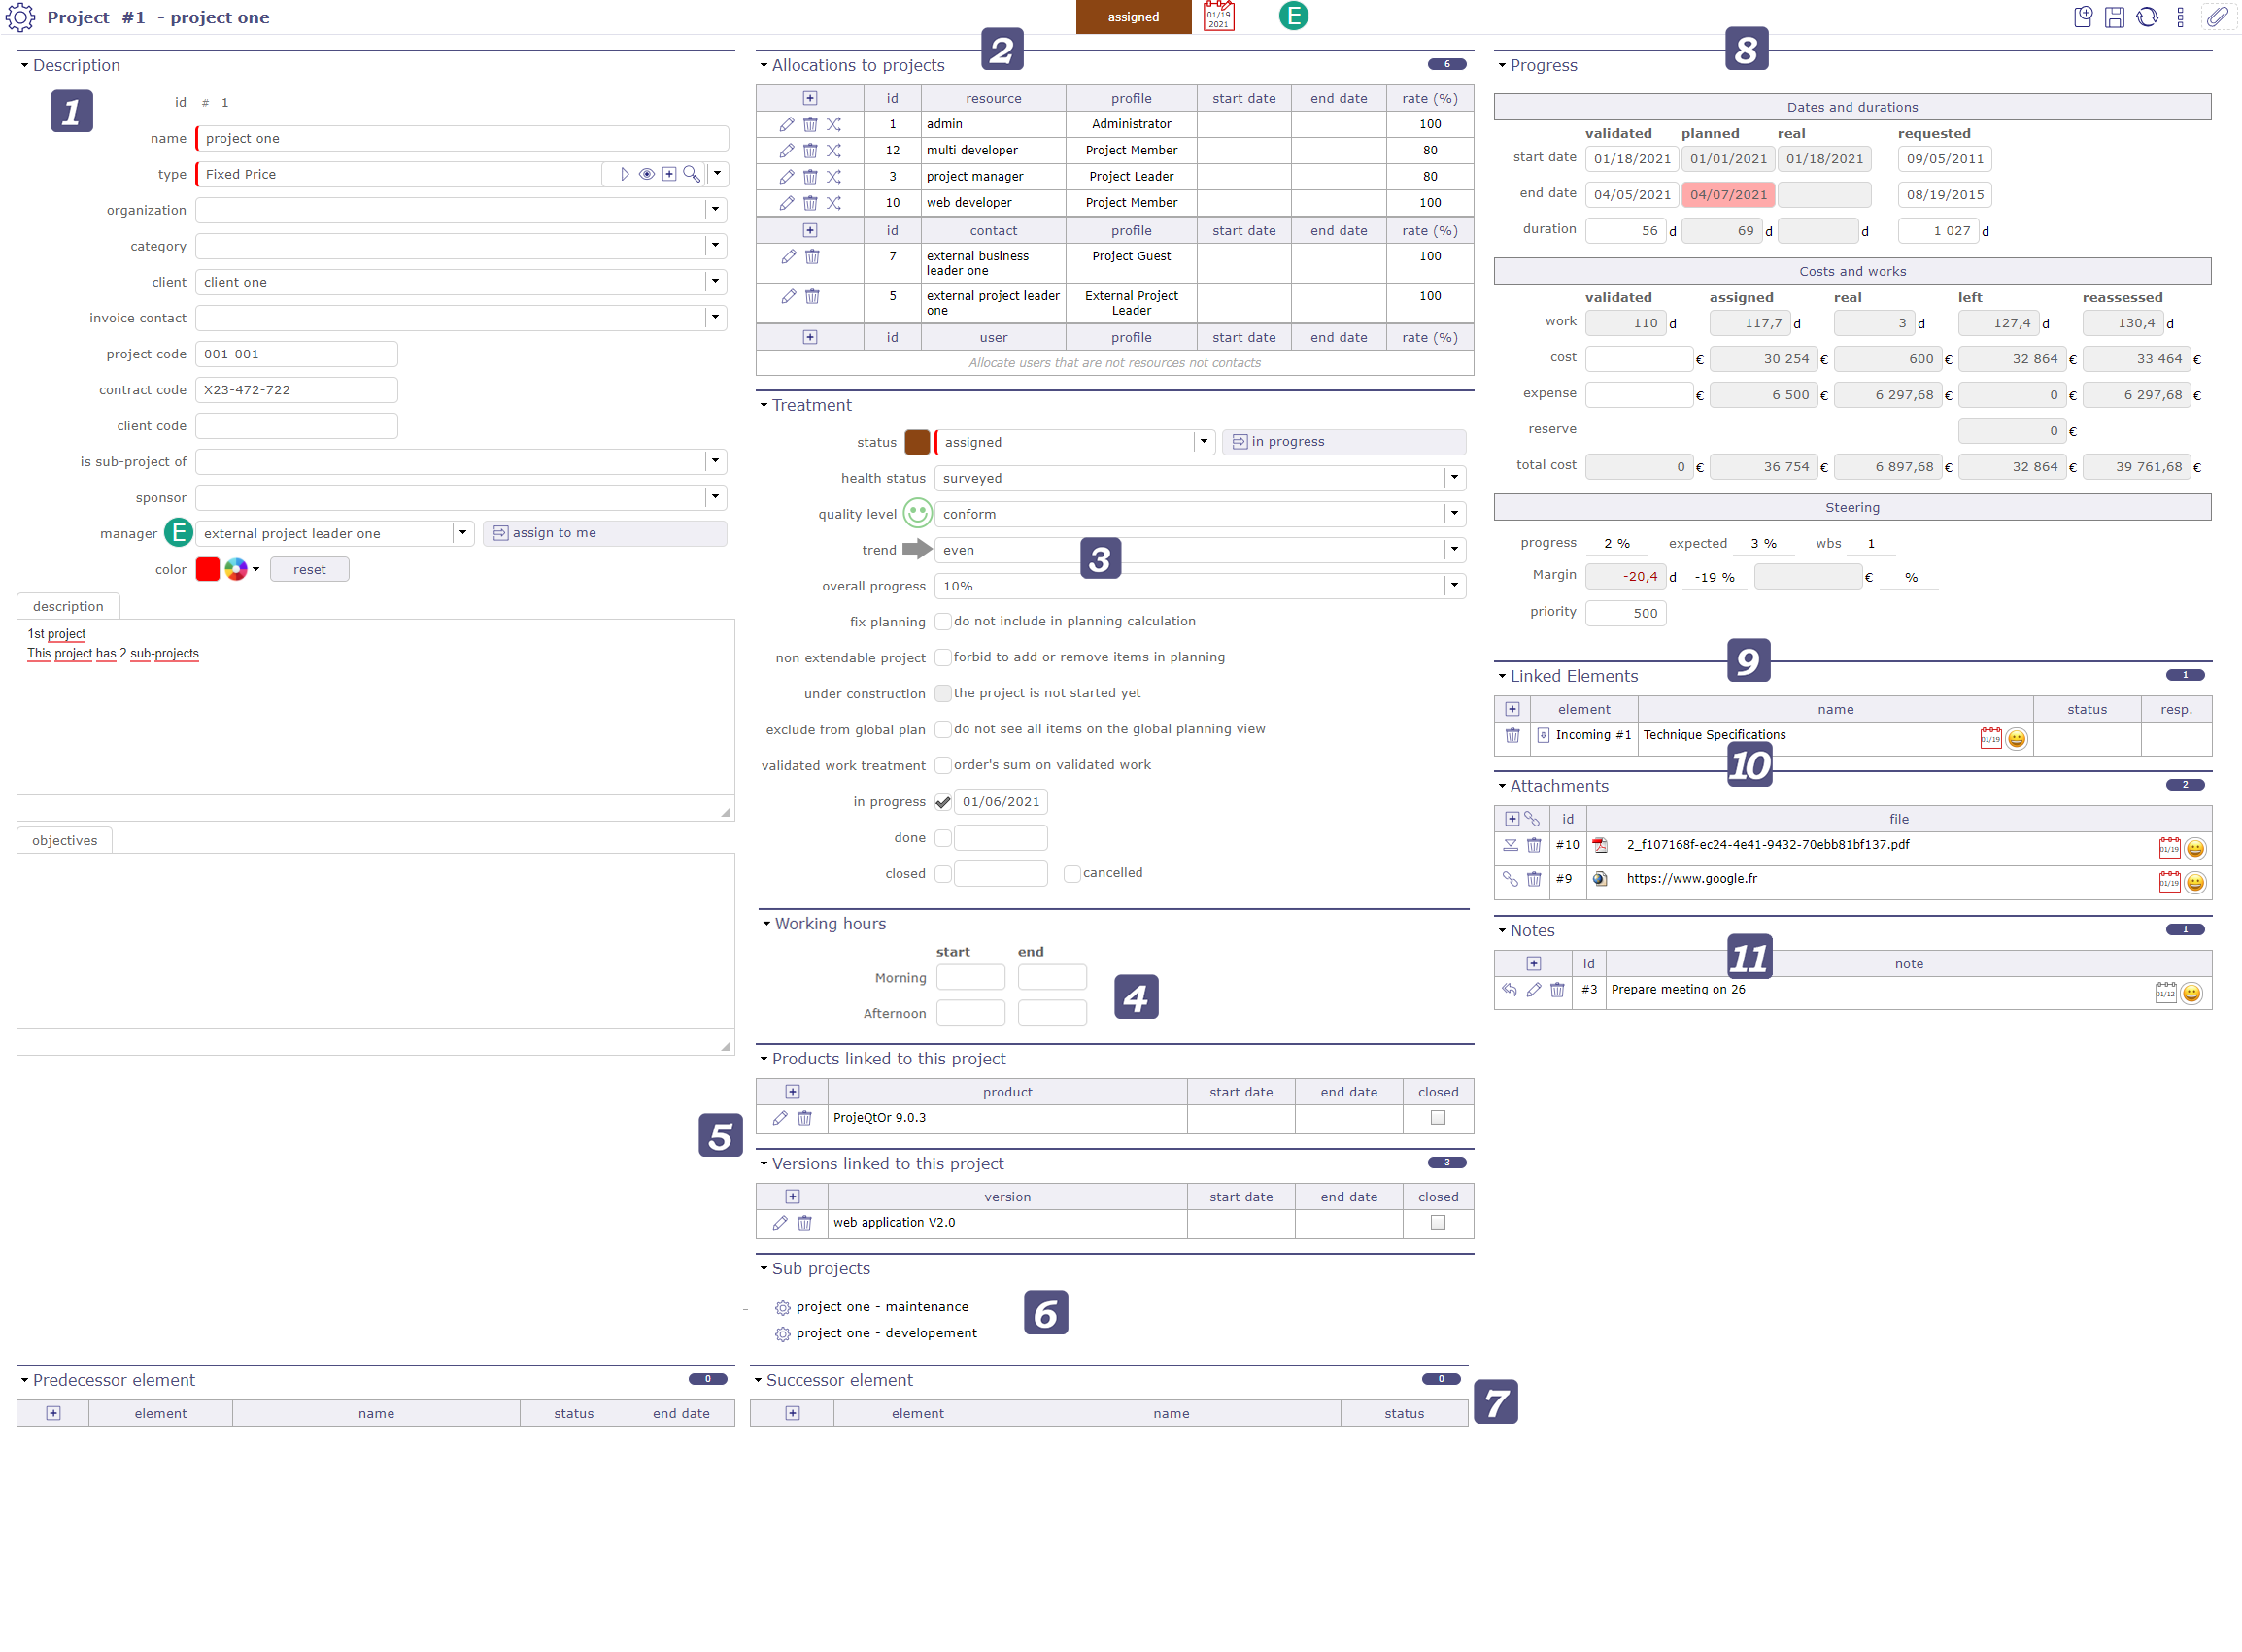 A view of ProjeQtOr's global interface